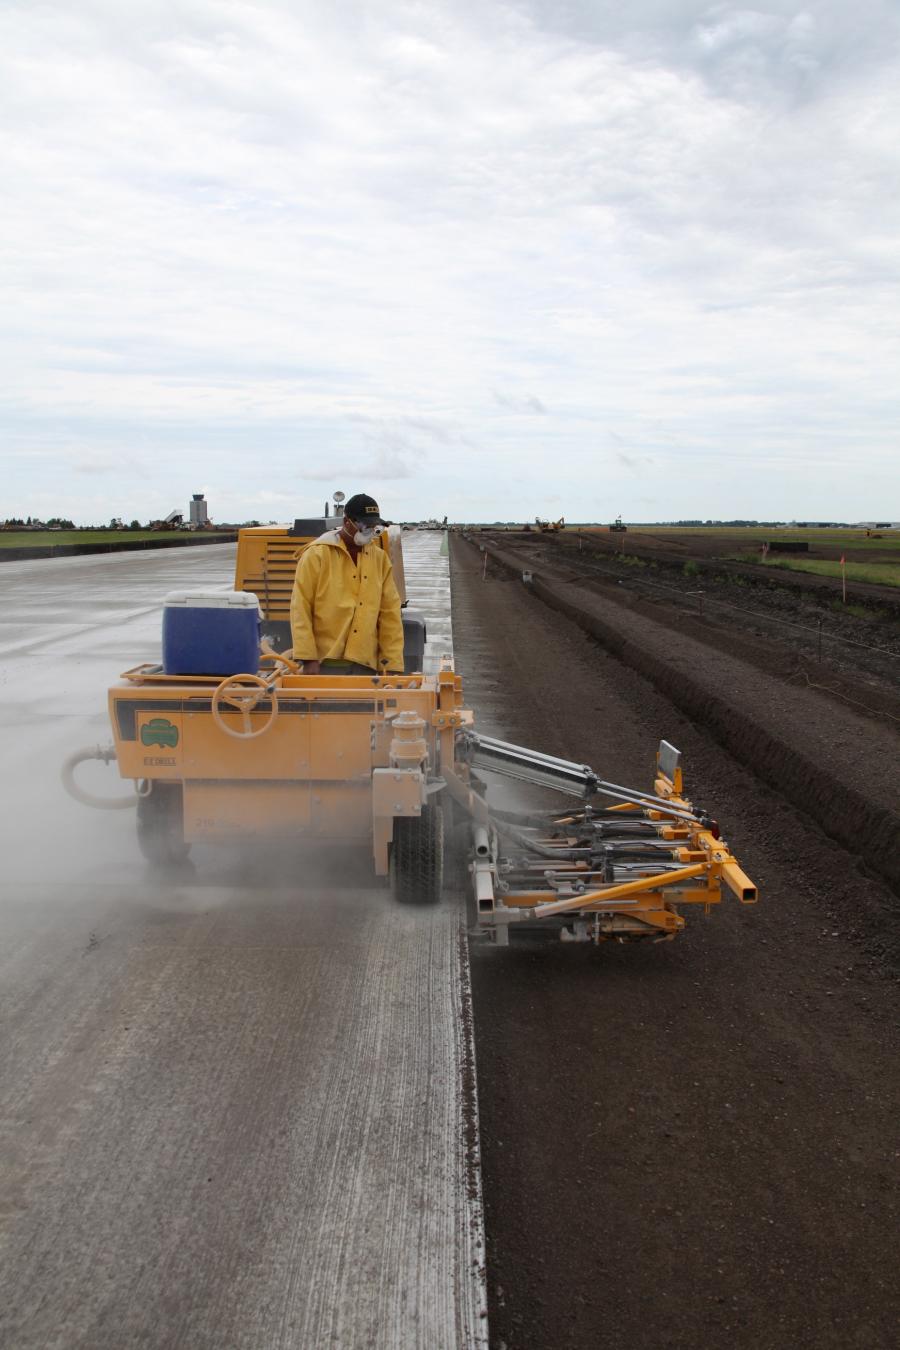 Performing regular maintenance on your concrete drills will help keep downtime to a minimum on road repair projects.